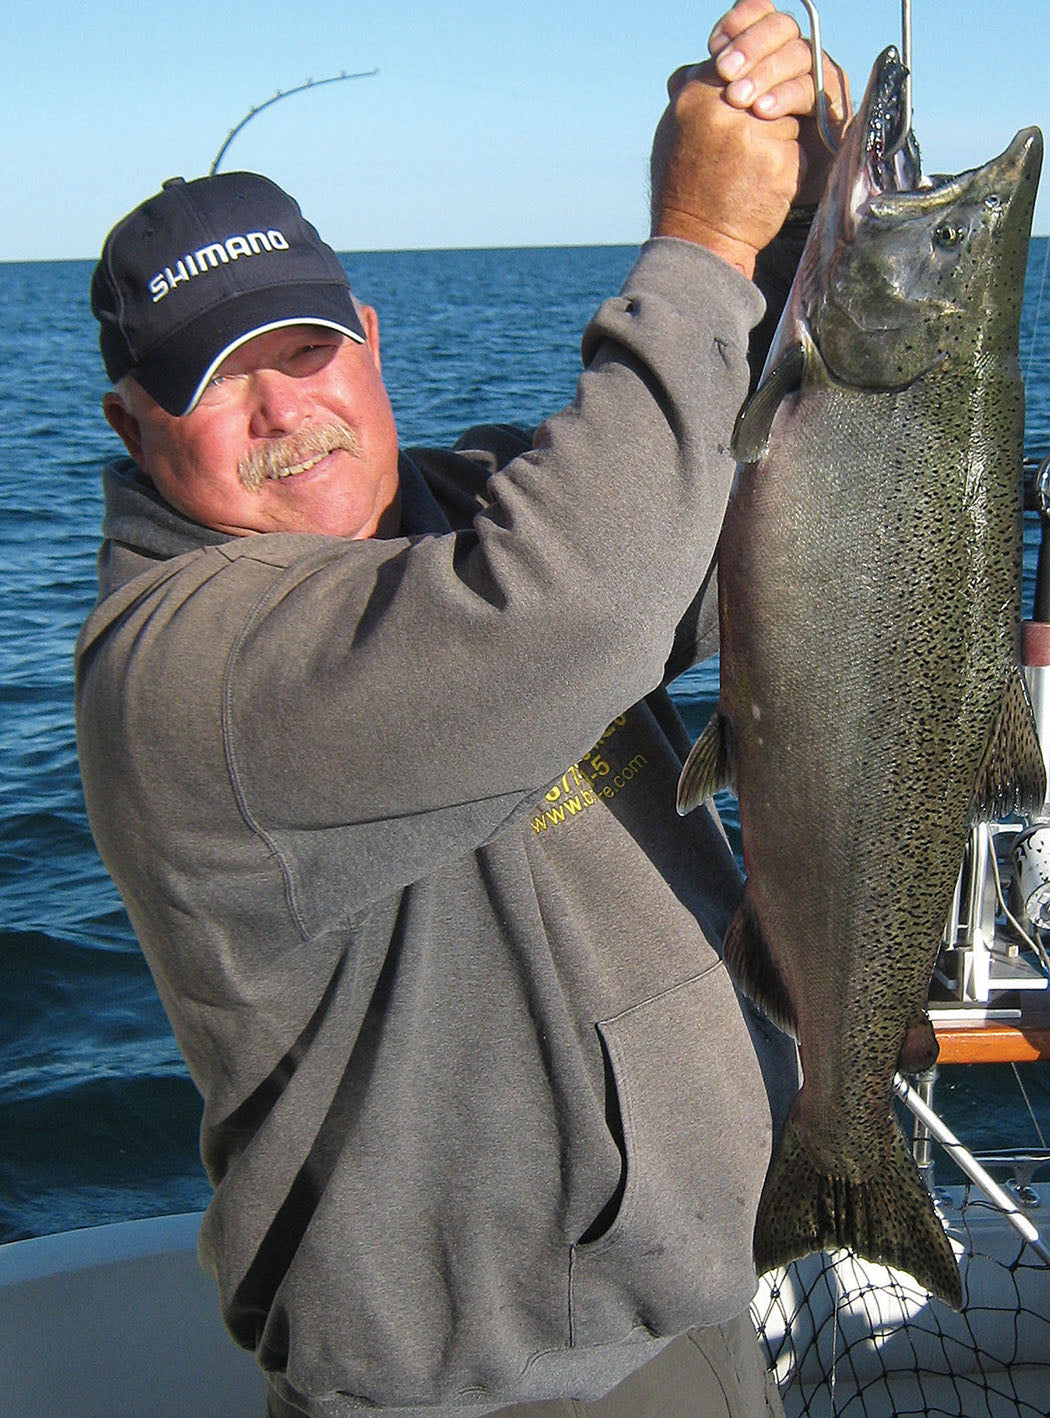 HOW OLD IS THAT FISH? - Captain Mike Schoonveld – Great Lakes Angler